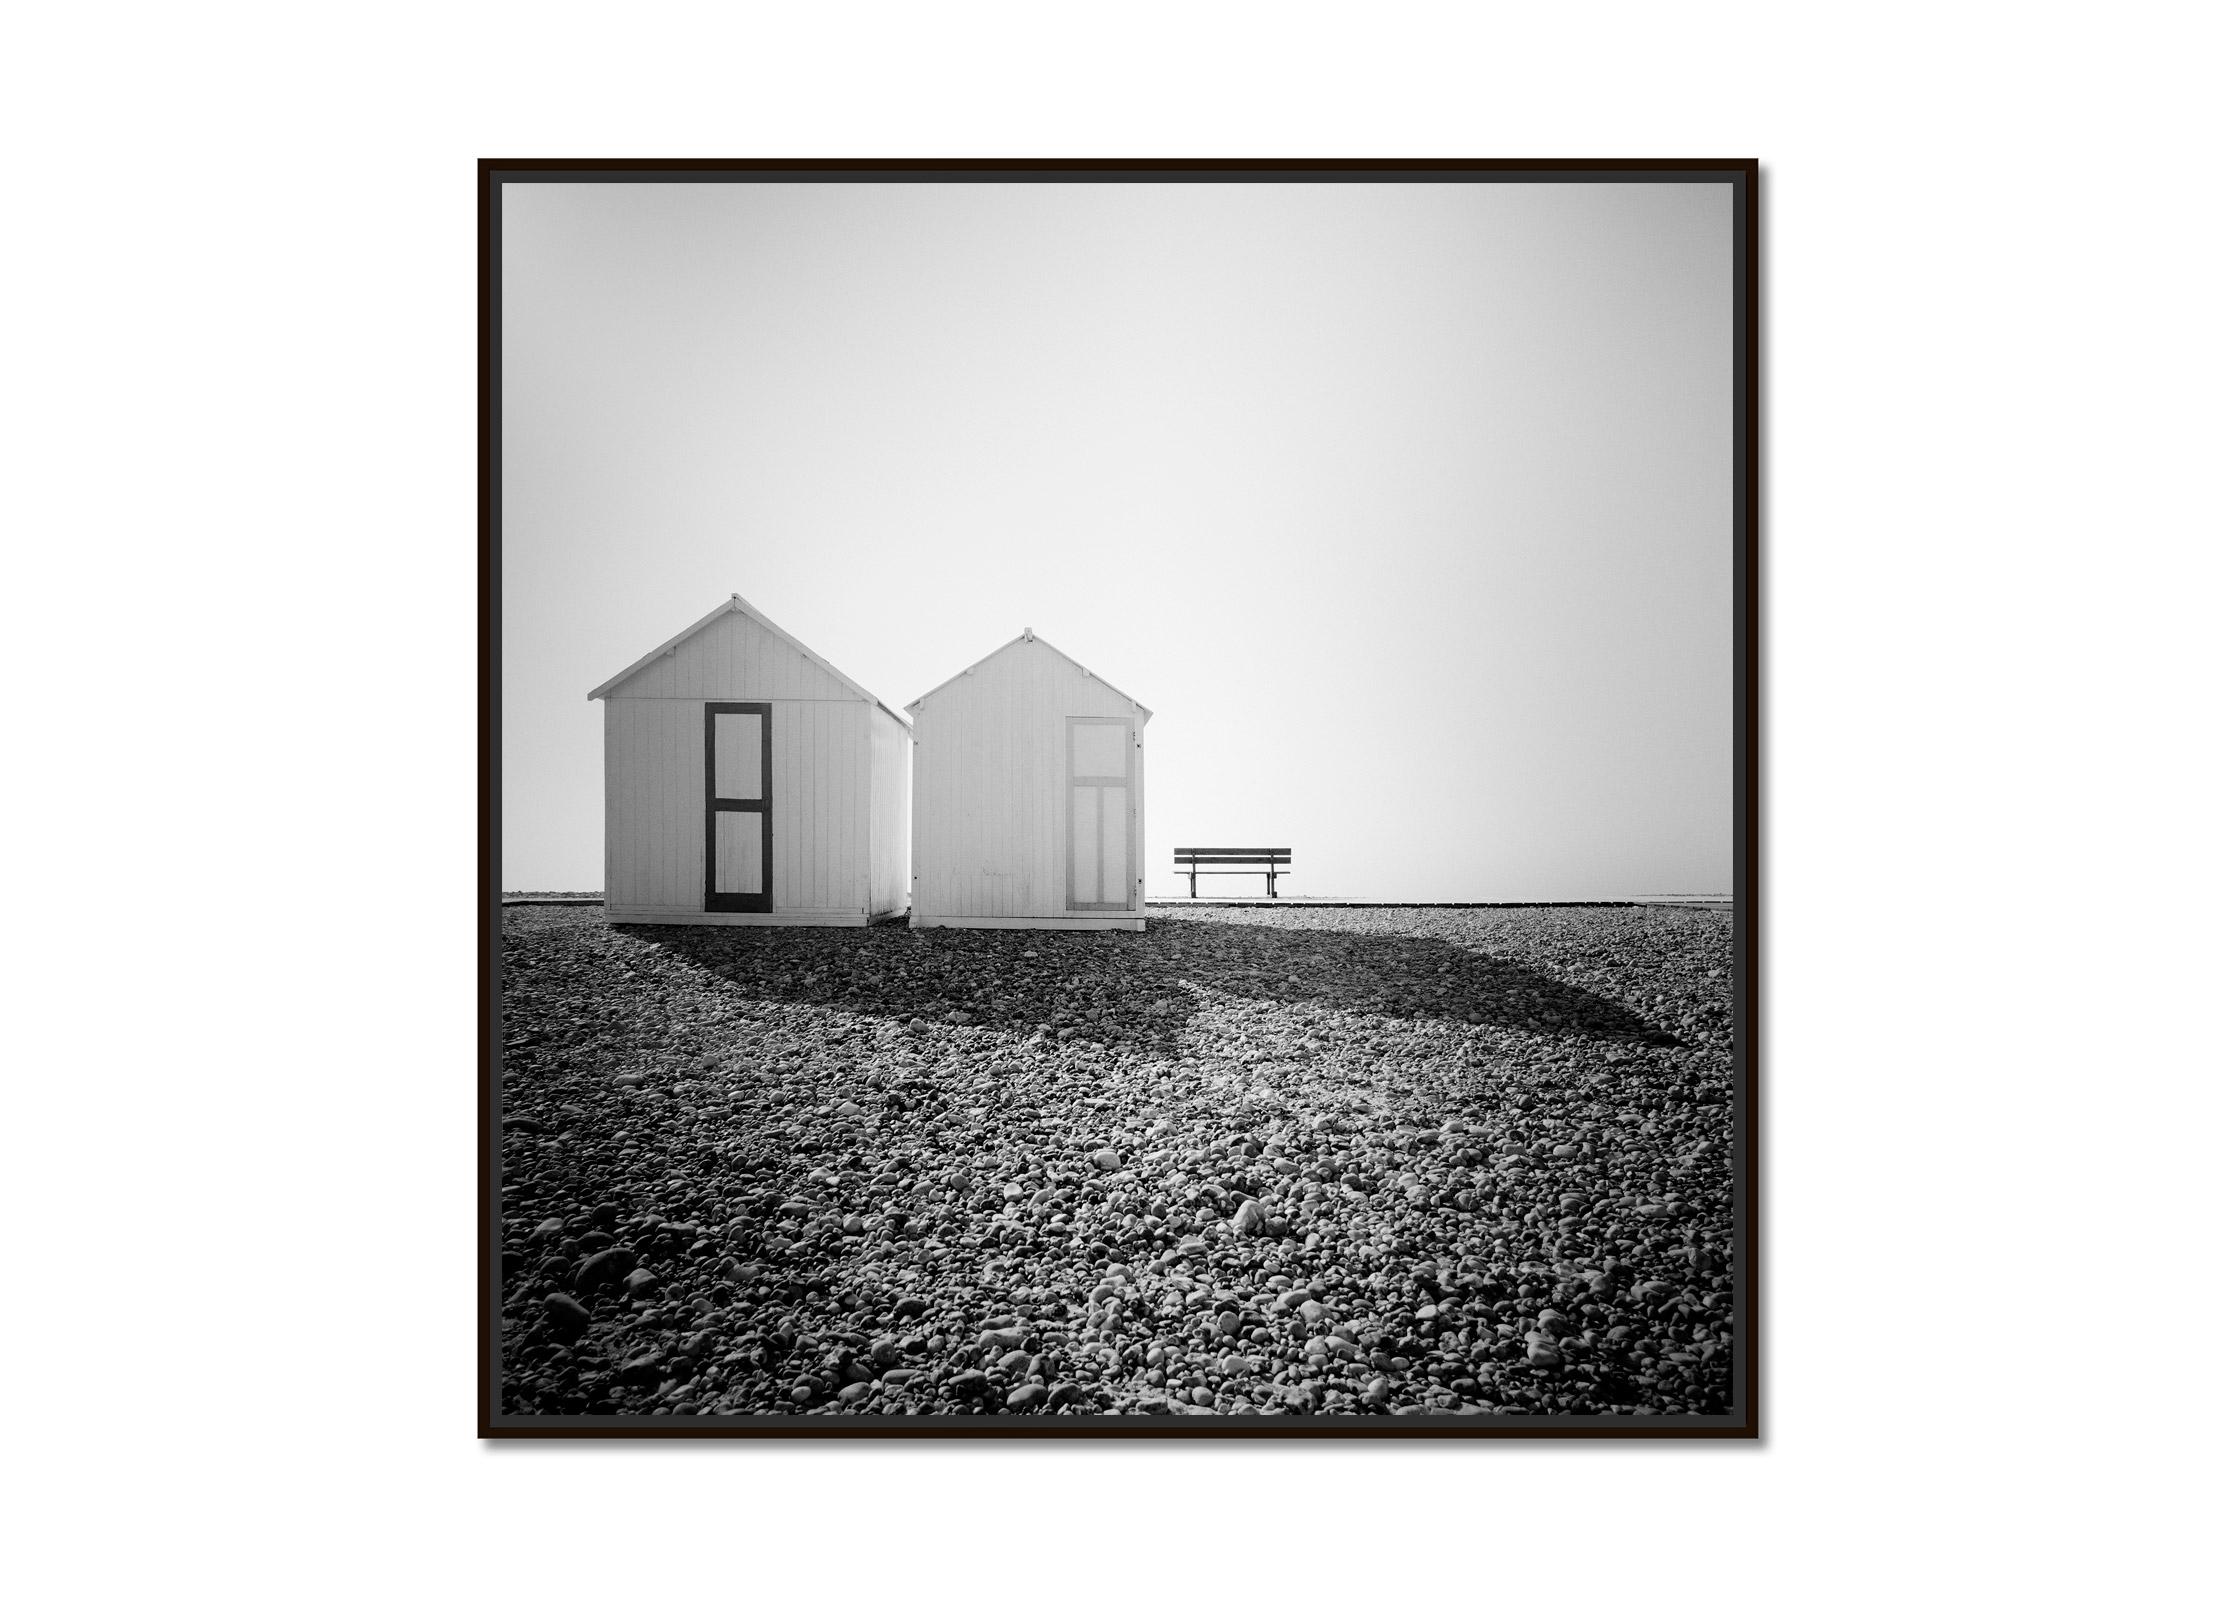 Beach Huts, silent Morning, minimalist black and white photography, landscape - Photograph by Gerald Berghammer